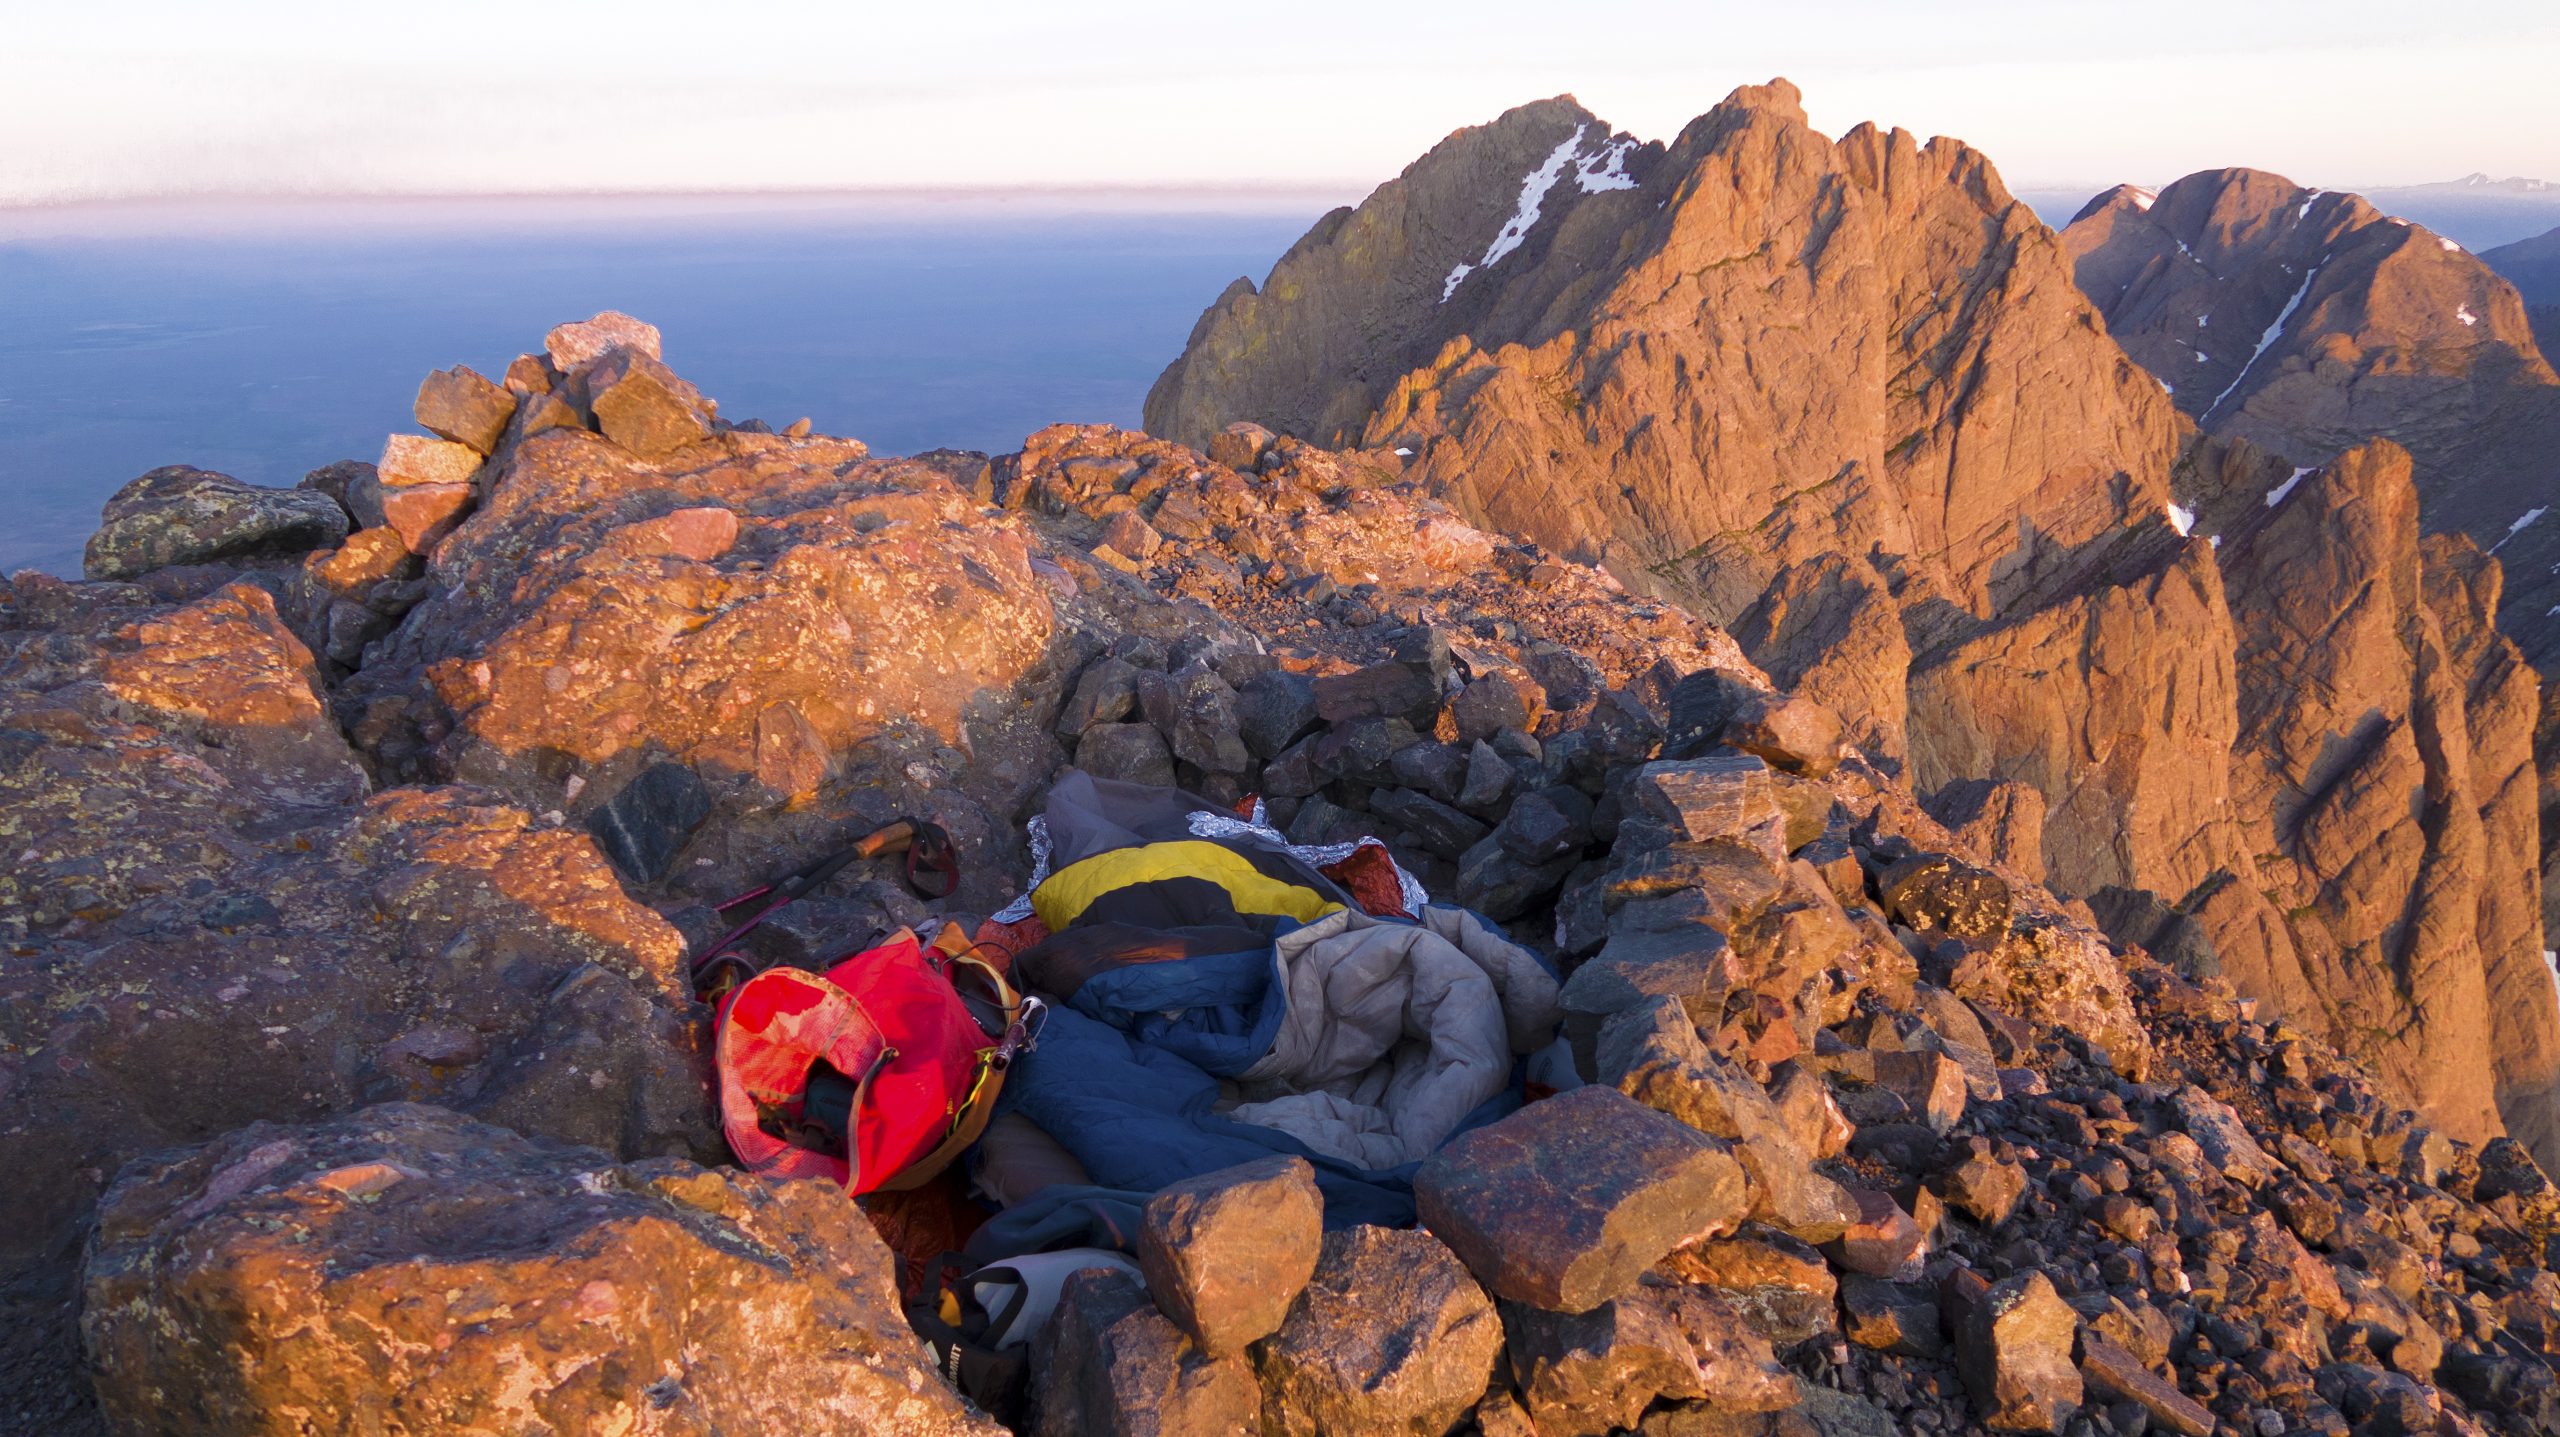 Morning after a bivvy on the summit of Crestone Needle